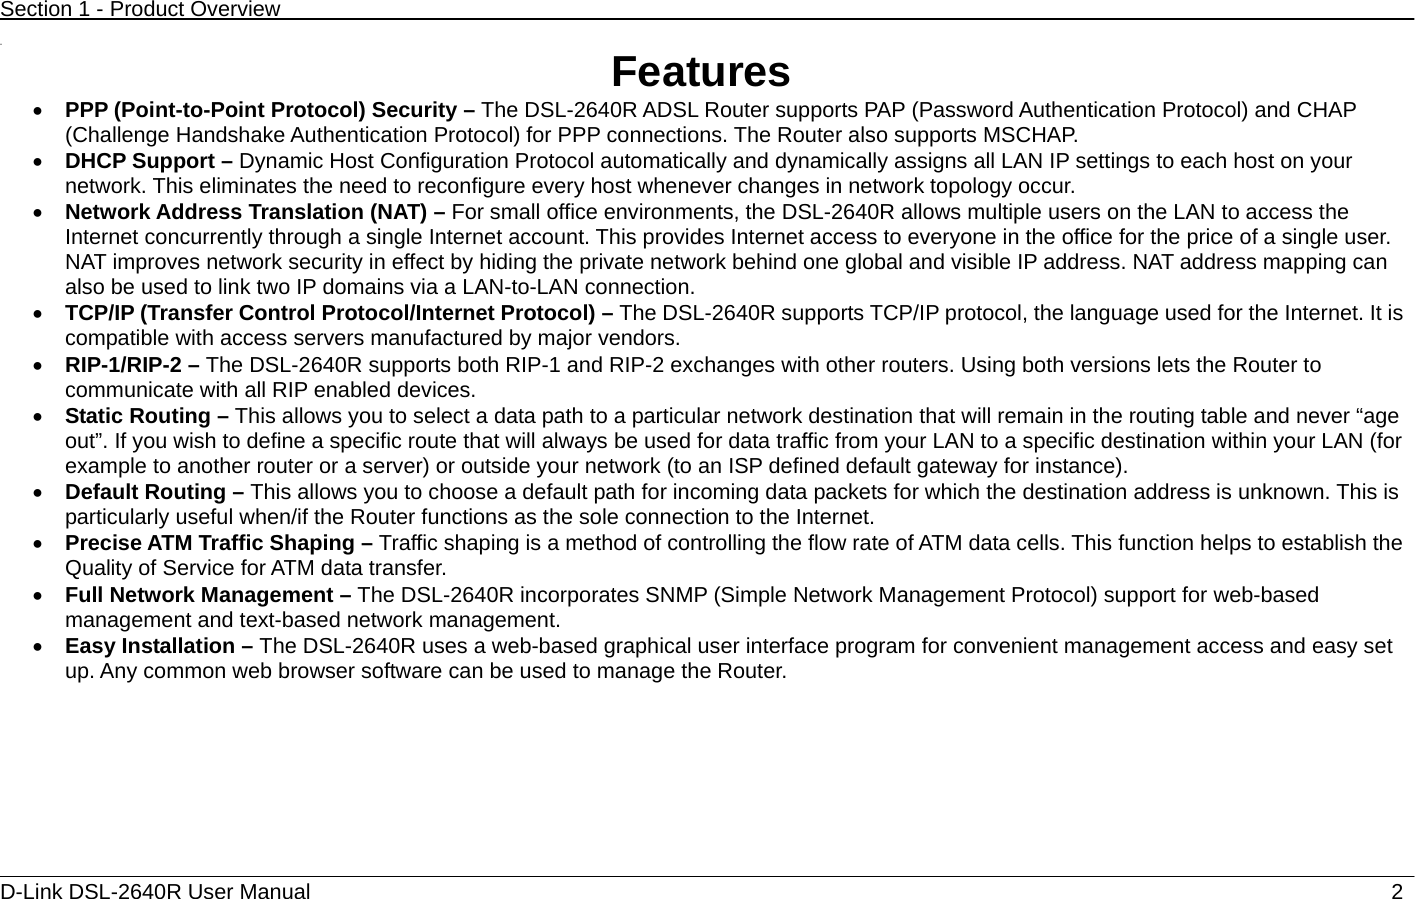 Section 1 - Product Overview  D-Link DSL-2640R User Manual                            2 11  Features • PPP (Point-to-Point Protocol) Security – The DSL-2640R ADSL Router supports PAP (Password Authentication Protocol) and CHAP (Challenge Handshake Authentication Protocol) for PPP connections. The Router also supports MSCHAP. • DHCP Support – Dynamic Host Configuration Protocol automatically and dynamically assigns all LAN IP settings to each host on your network. This eliminates the need to reconfigure every host whenever changes in network topology occur. • Network Address Translation (NAT) – For small office environments, the DSL-2640R allows multiple users on the LAN to access the Internet concurrently through a single Internet account. This provides Internet access to everyone in the office for the price of a single user. NAT improves network security in effect by hiding the private network behind one global and visible IP address. NAT address mapping can also be used to link two IP domains via a LAN-to-LAN connection. • TCP/IP (Transfer Control Protocol/Internet Protocol) – The DSL-2640R supports TCP/IP protocol, the language used for the Internet. It is compatible with access servers manufactured by major vendors. • RIP-1/RIP-2 – The DSL-2640R supports both RIP-1 and RIP-2 exchanges with other routers. Using both versions lets the Router to communicate with all RIP enabled devices. • Static Routing – This allows you to select a data path to a particular network destination that will remain in the routing table and never “age out”. If you wish to define a specific route that will always be used for data traffic from your LAN to a specific destination within your LAN (for example to another router or a server) or outside your network (to an ISP defined default gateway for instance).     • Default Routing – This allows you to choose a default path for incoming data packets for which the destination address is unknown. This is particularly useful when/if the Router functions as the sole connection to the Internet. • Precise ATM Traffic Shaping – Traffic shaping is a method of controlling the flow rate of ATM data cells. This function helps to establish the Quality of Service for ATM data transfer. • Full Network Management – The DSL-2640R incorporates SNMP (Simple Network Management Protocol) support for web-based management and text-based network management. • Easy Installation – The DSL-2640R uses a web-based graphical user interface program for convenient management access and easy set up. Any common web browser software can be used to manage the Router. 